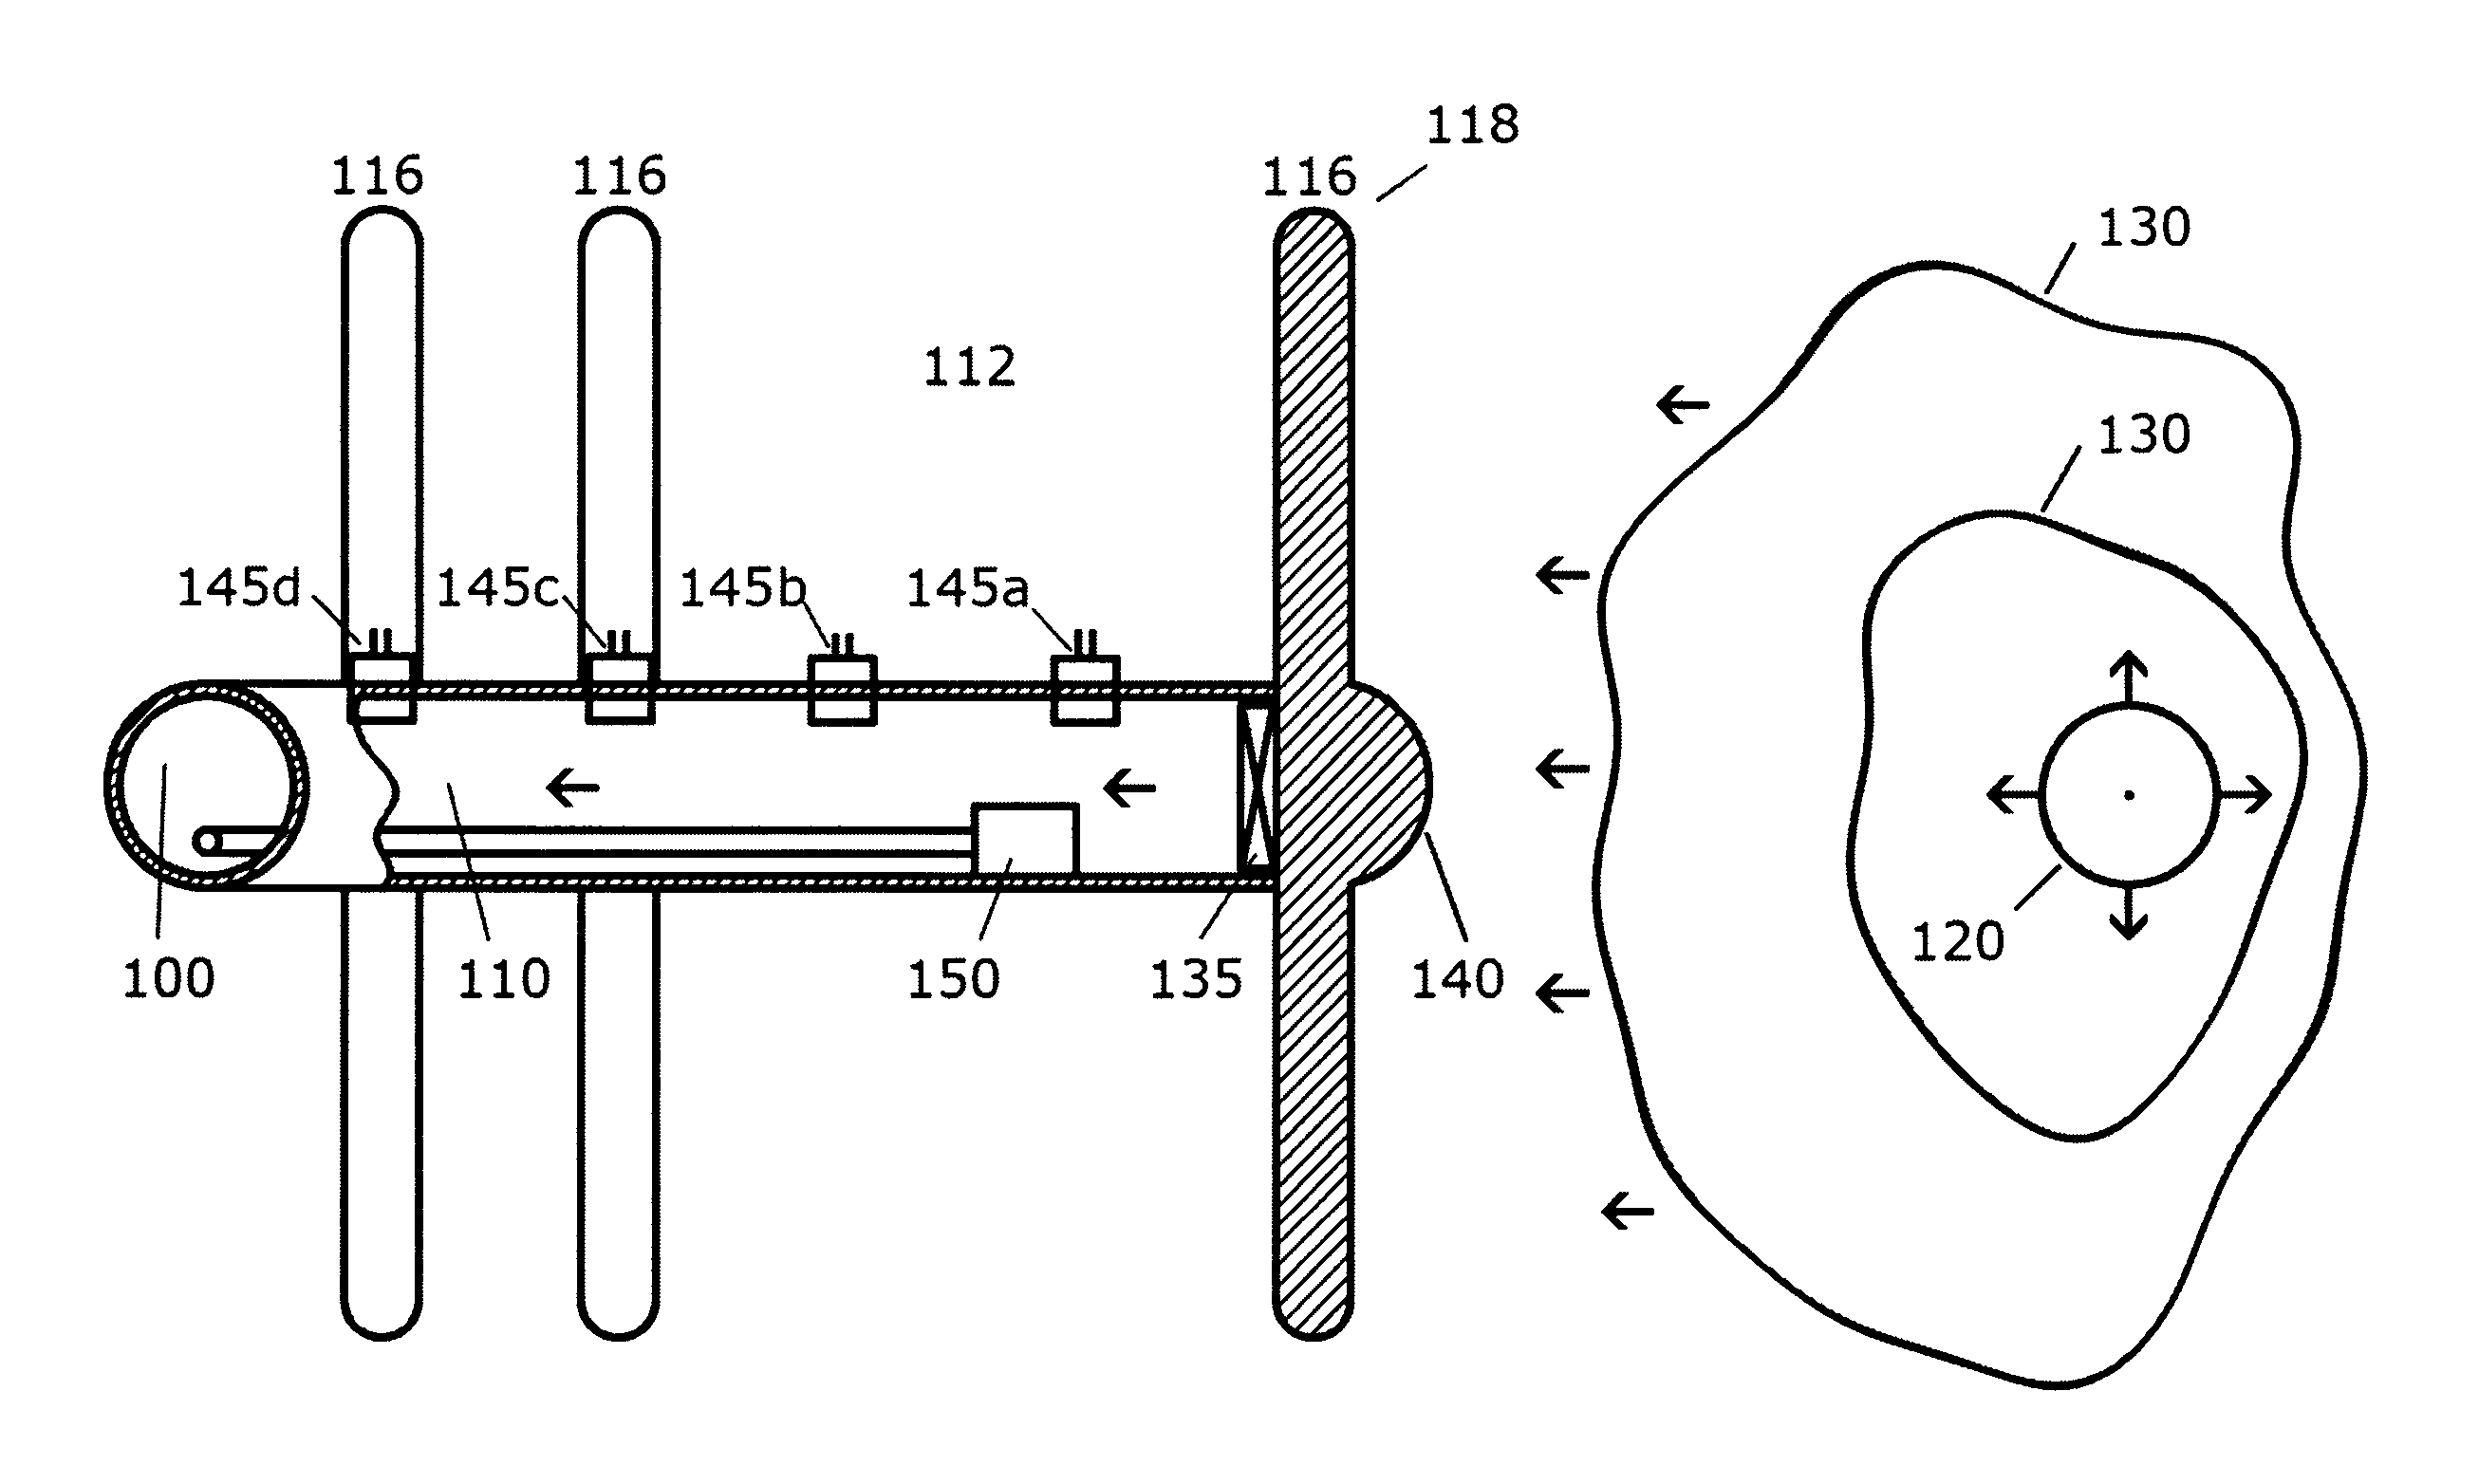 Method of improving waterflood performance using barrier fractures and inflow control devices